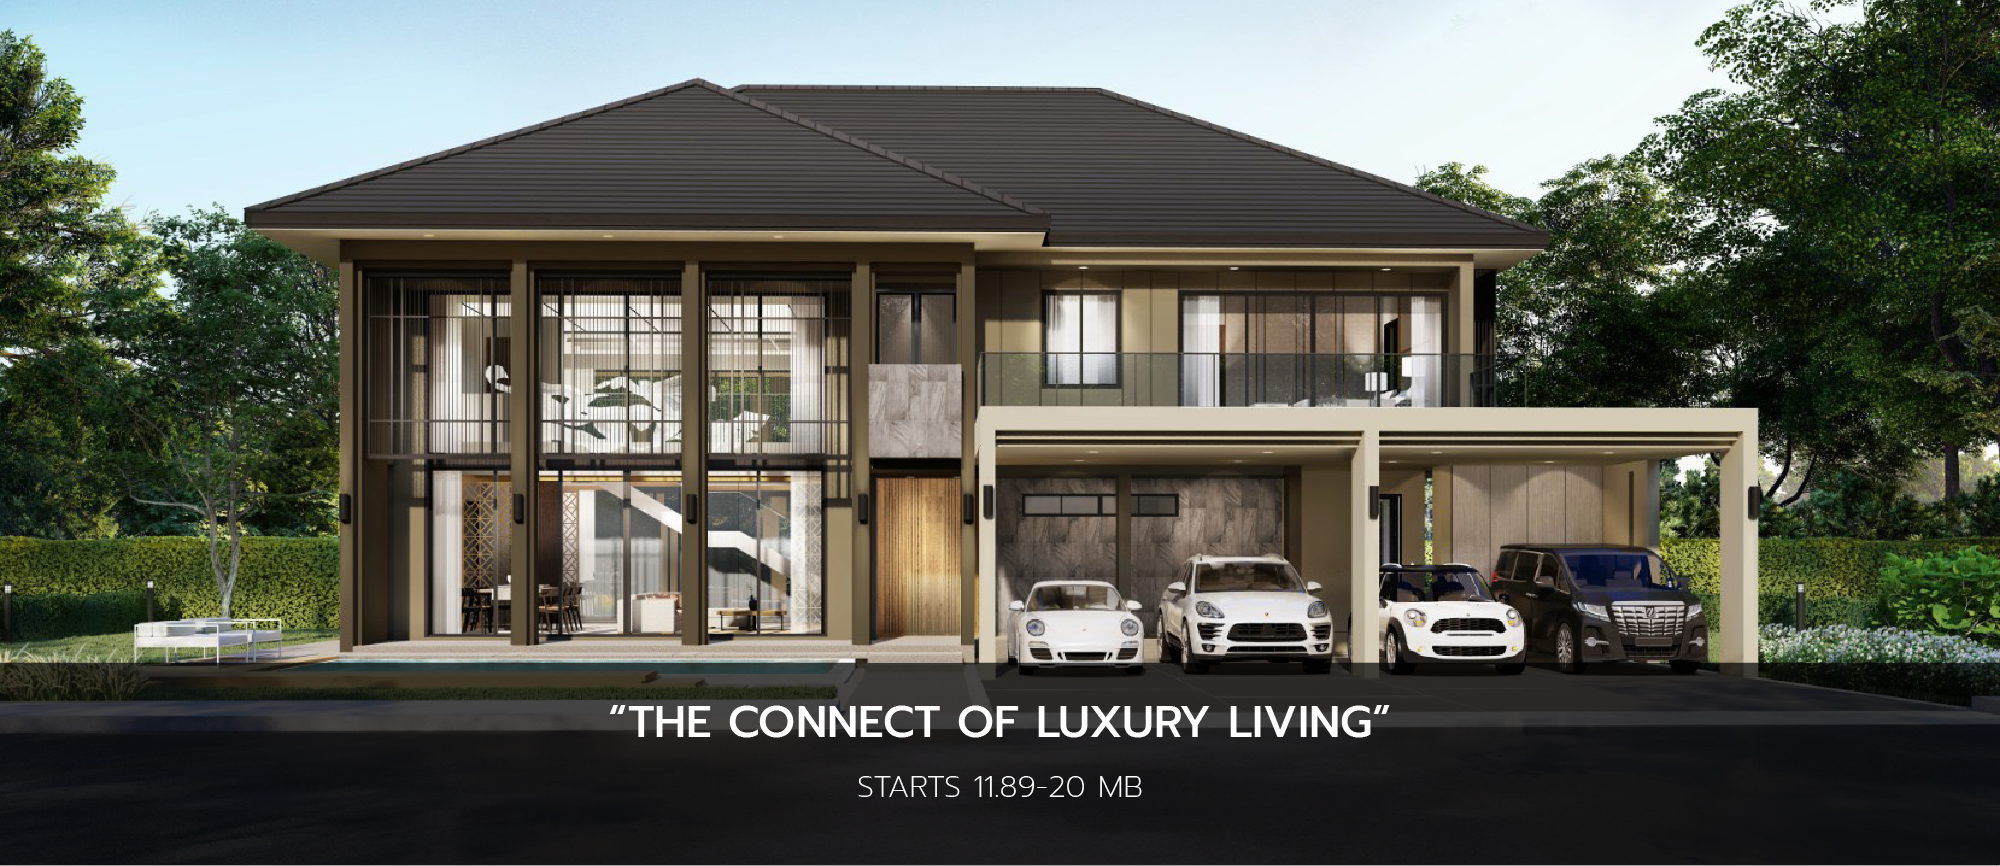 “THE CONNECT OF LUXURY LIVING”